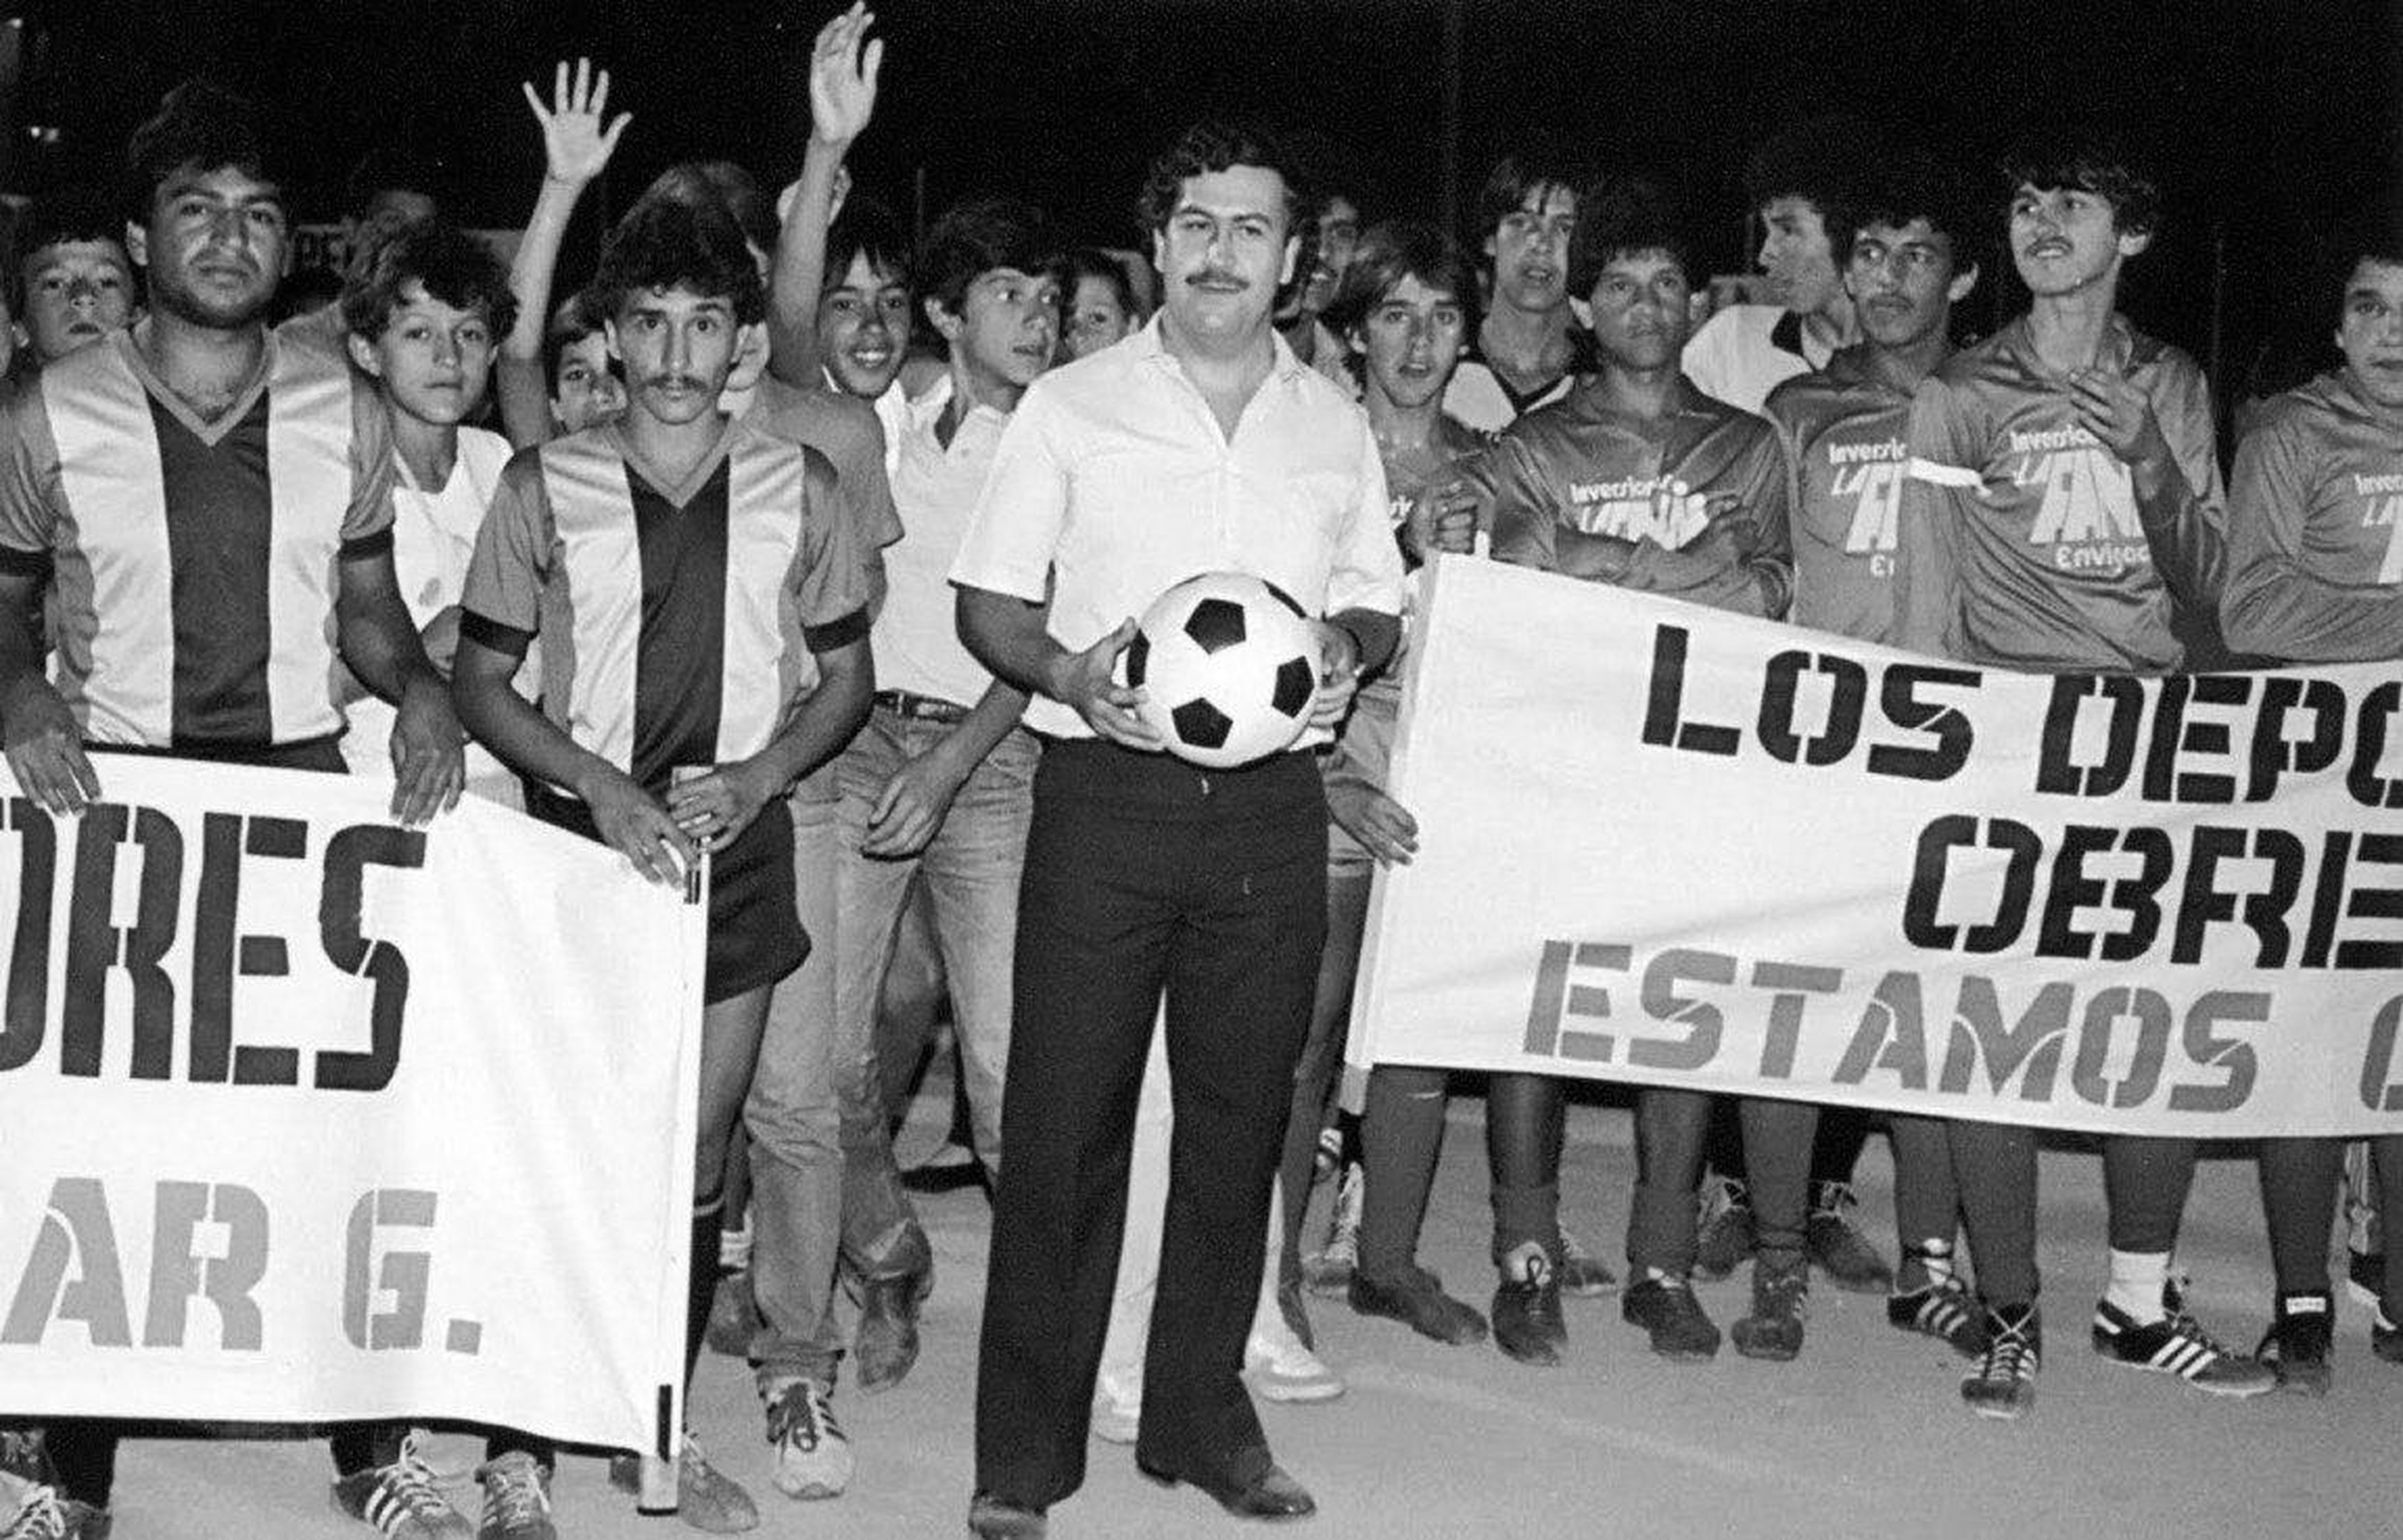 Pablo Escobar was known for his largesse, including funding local soccer clubs.